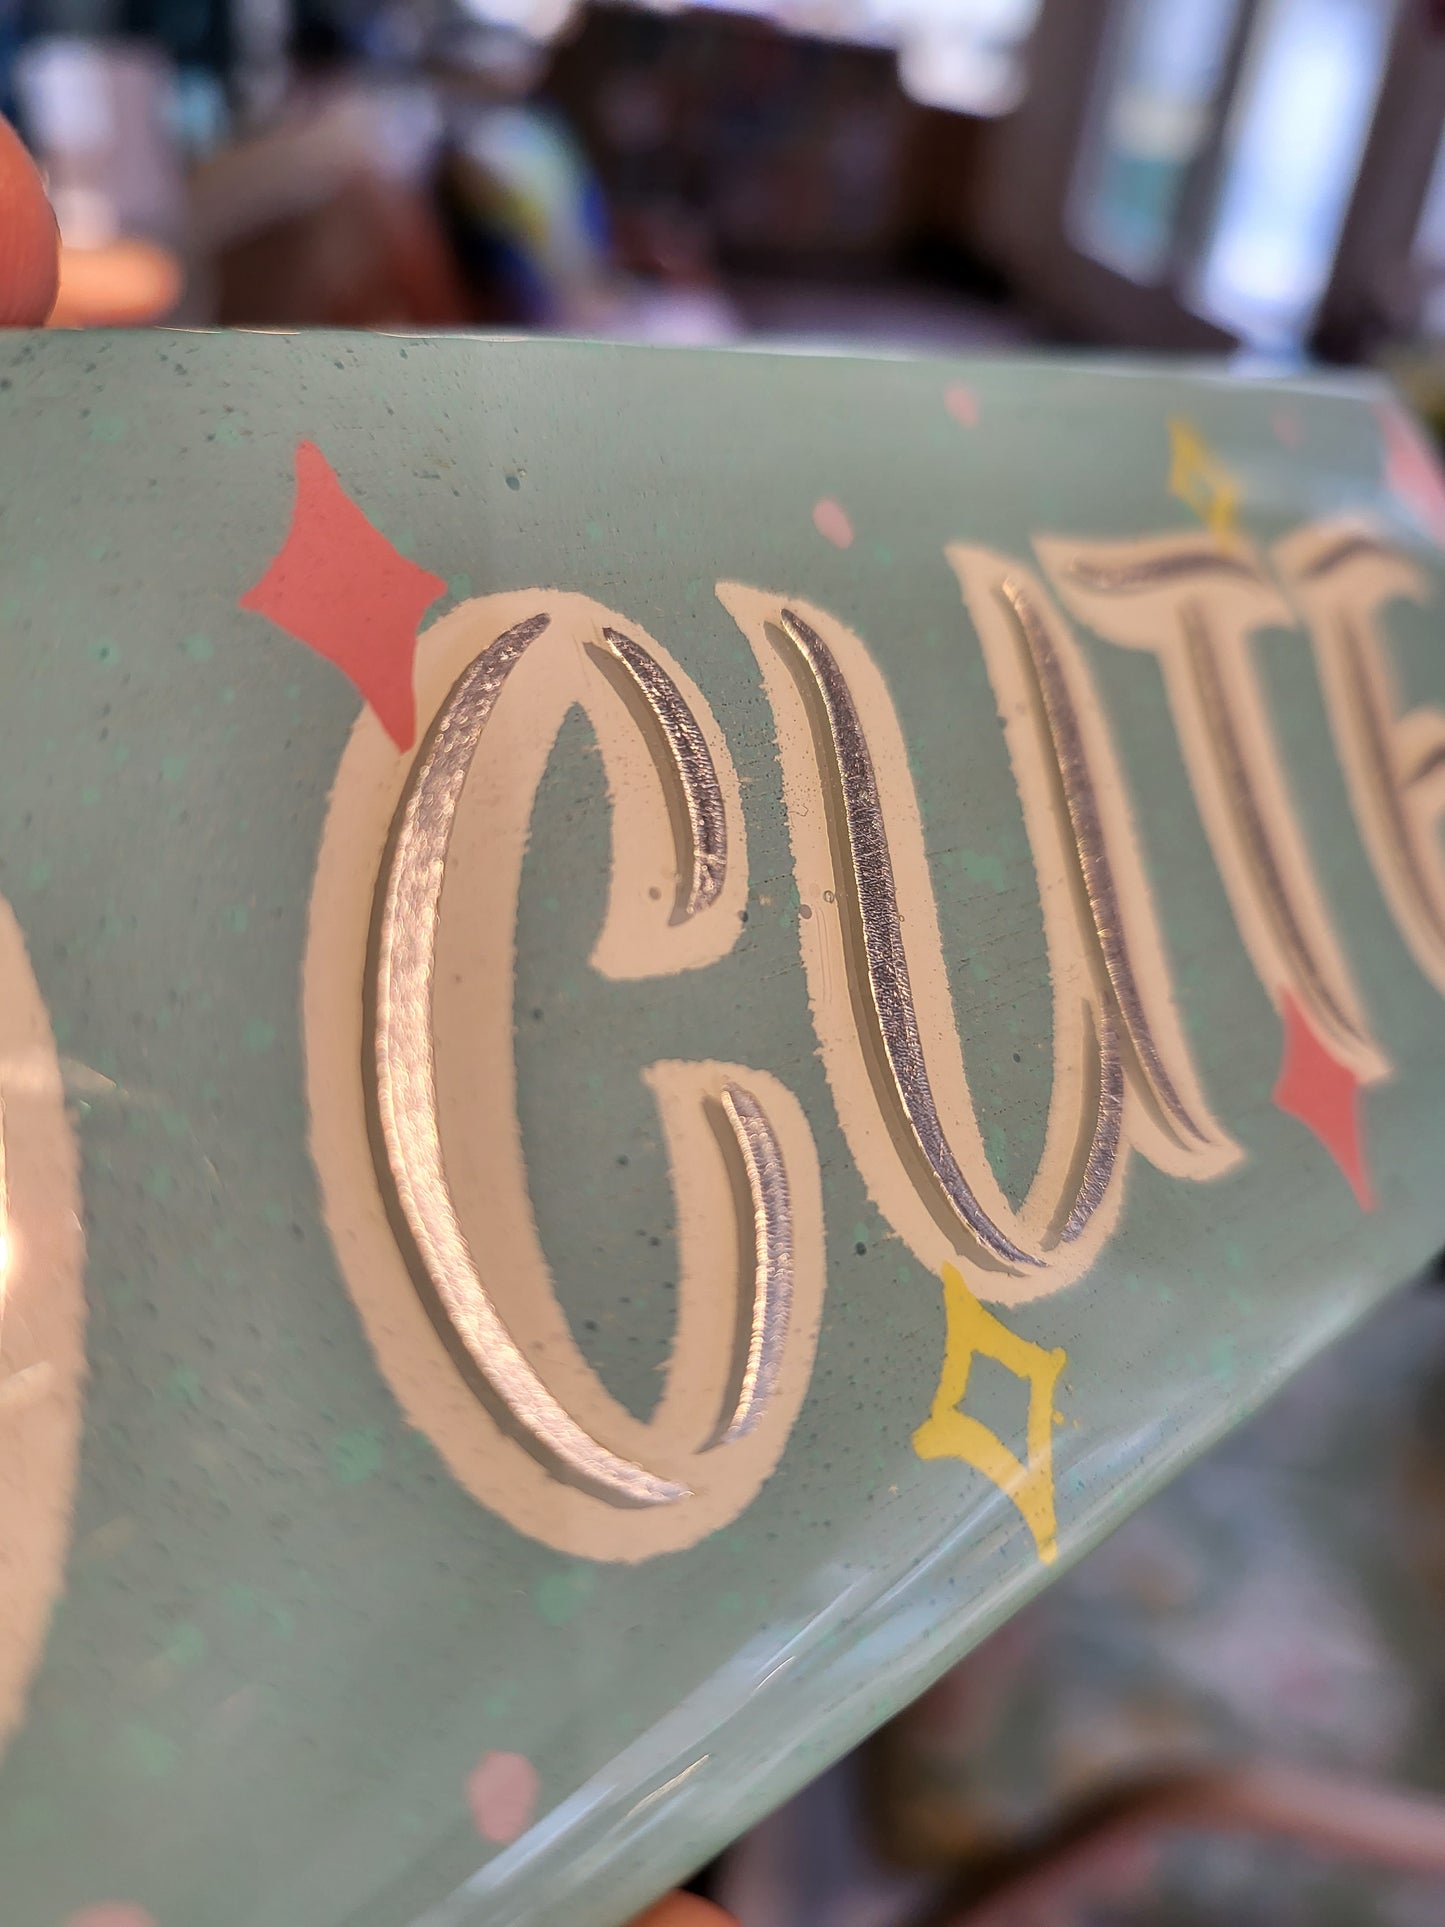 Ellietype | 'So Cute' | Hand Painted Mini Sign